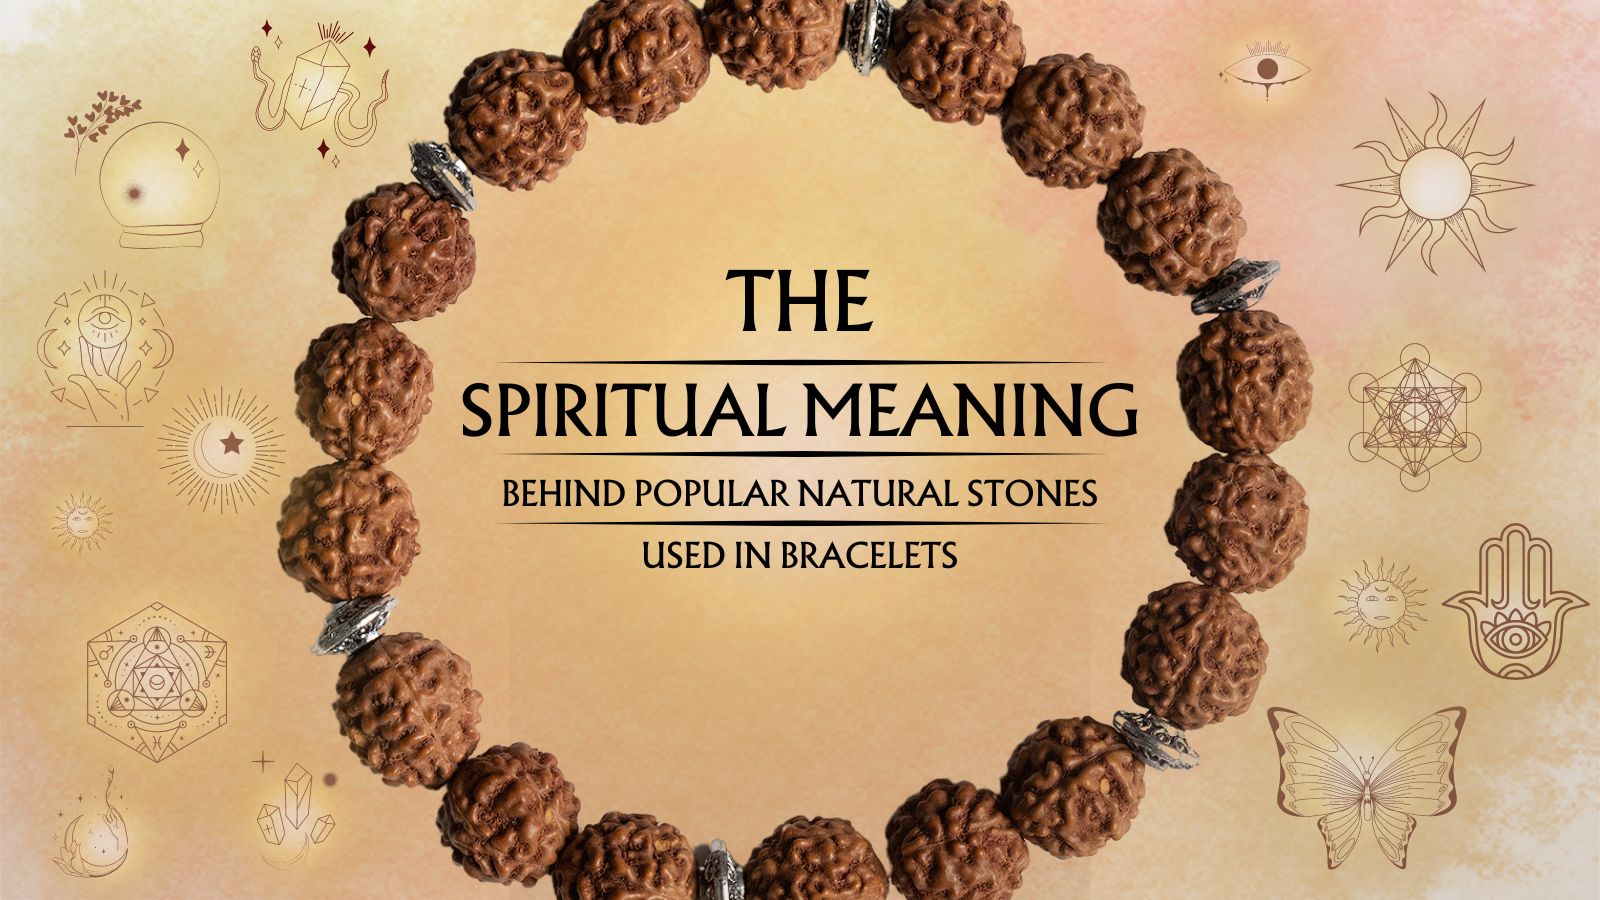 The Spiritual Meaning Behind Popular Natural Stones Used in Bracelets